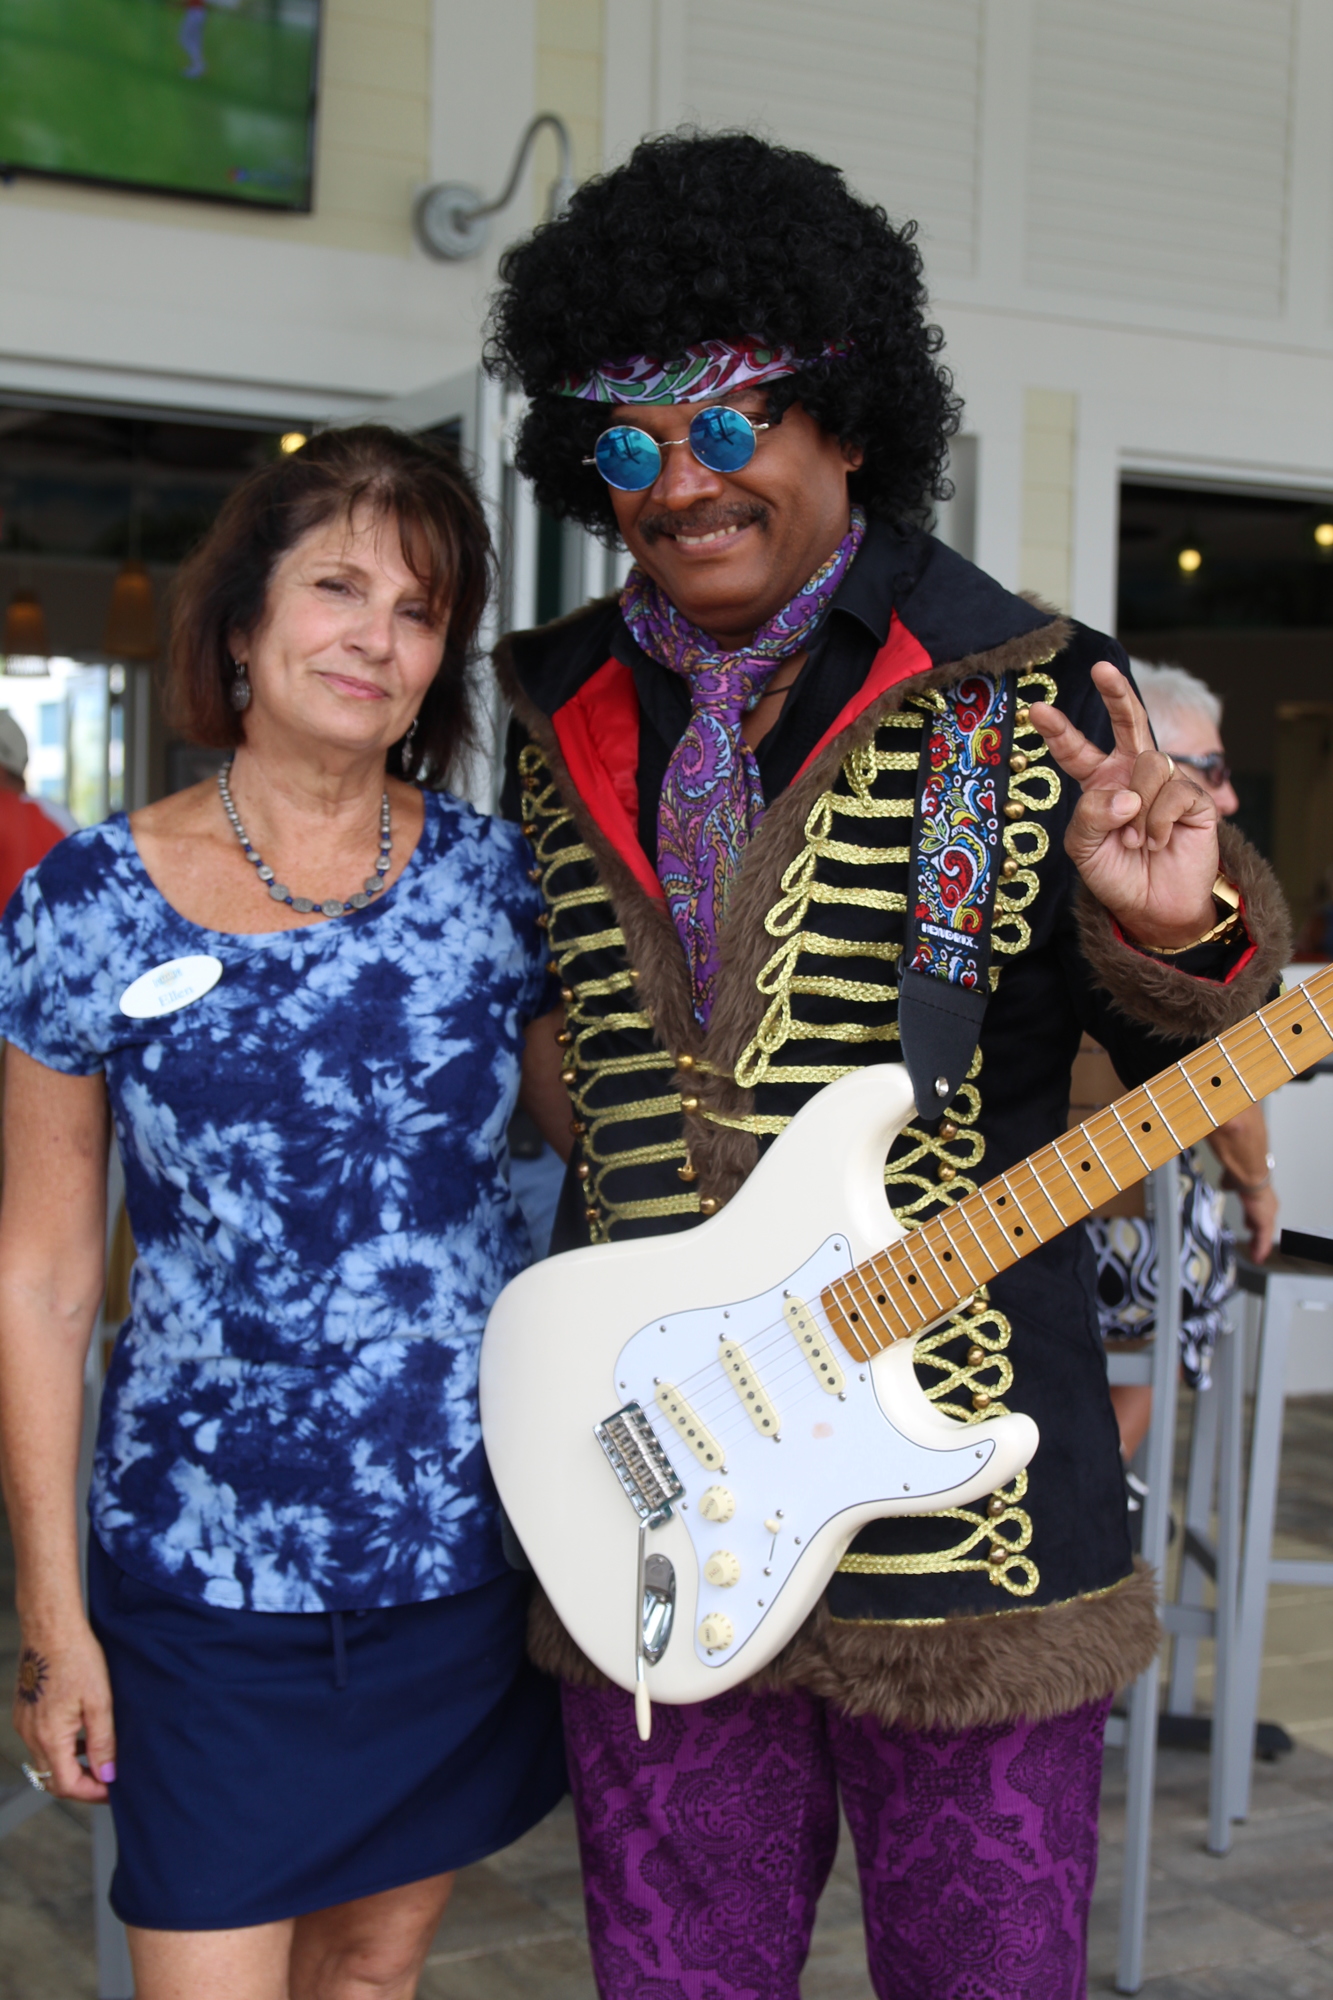 Latitude hostess Ellen Money poses with Jimmy Hendrix. She said she loves her job. Photo by Tanya Russo